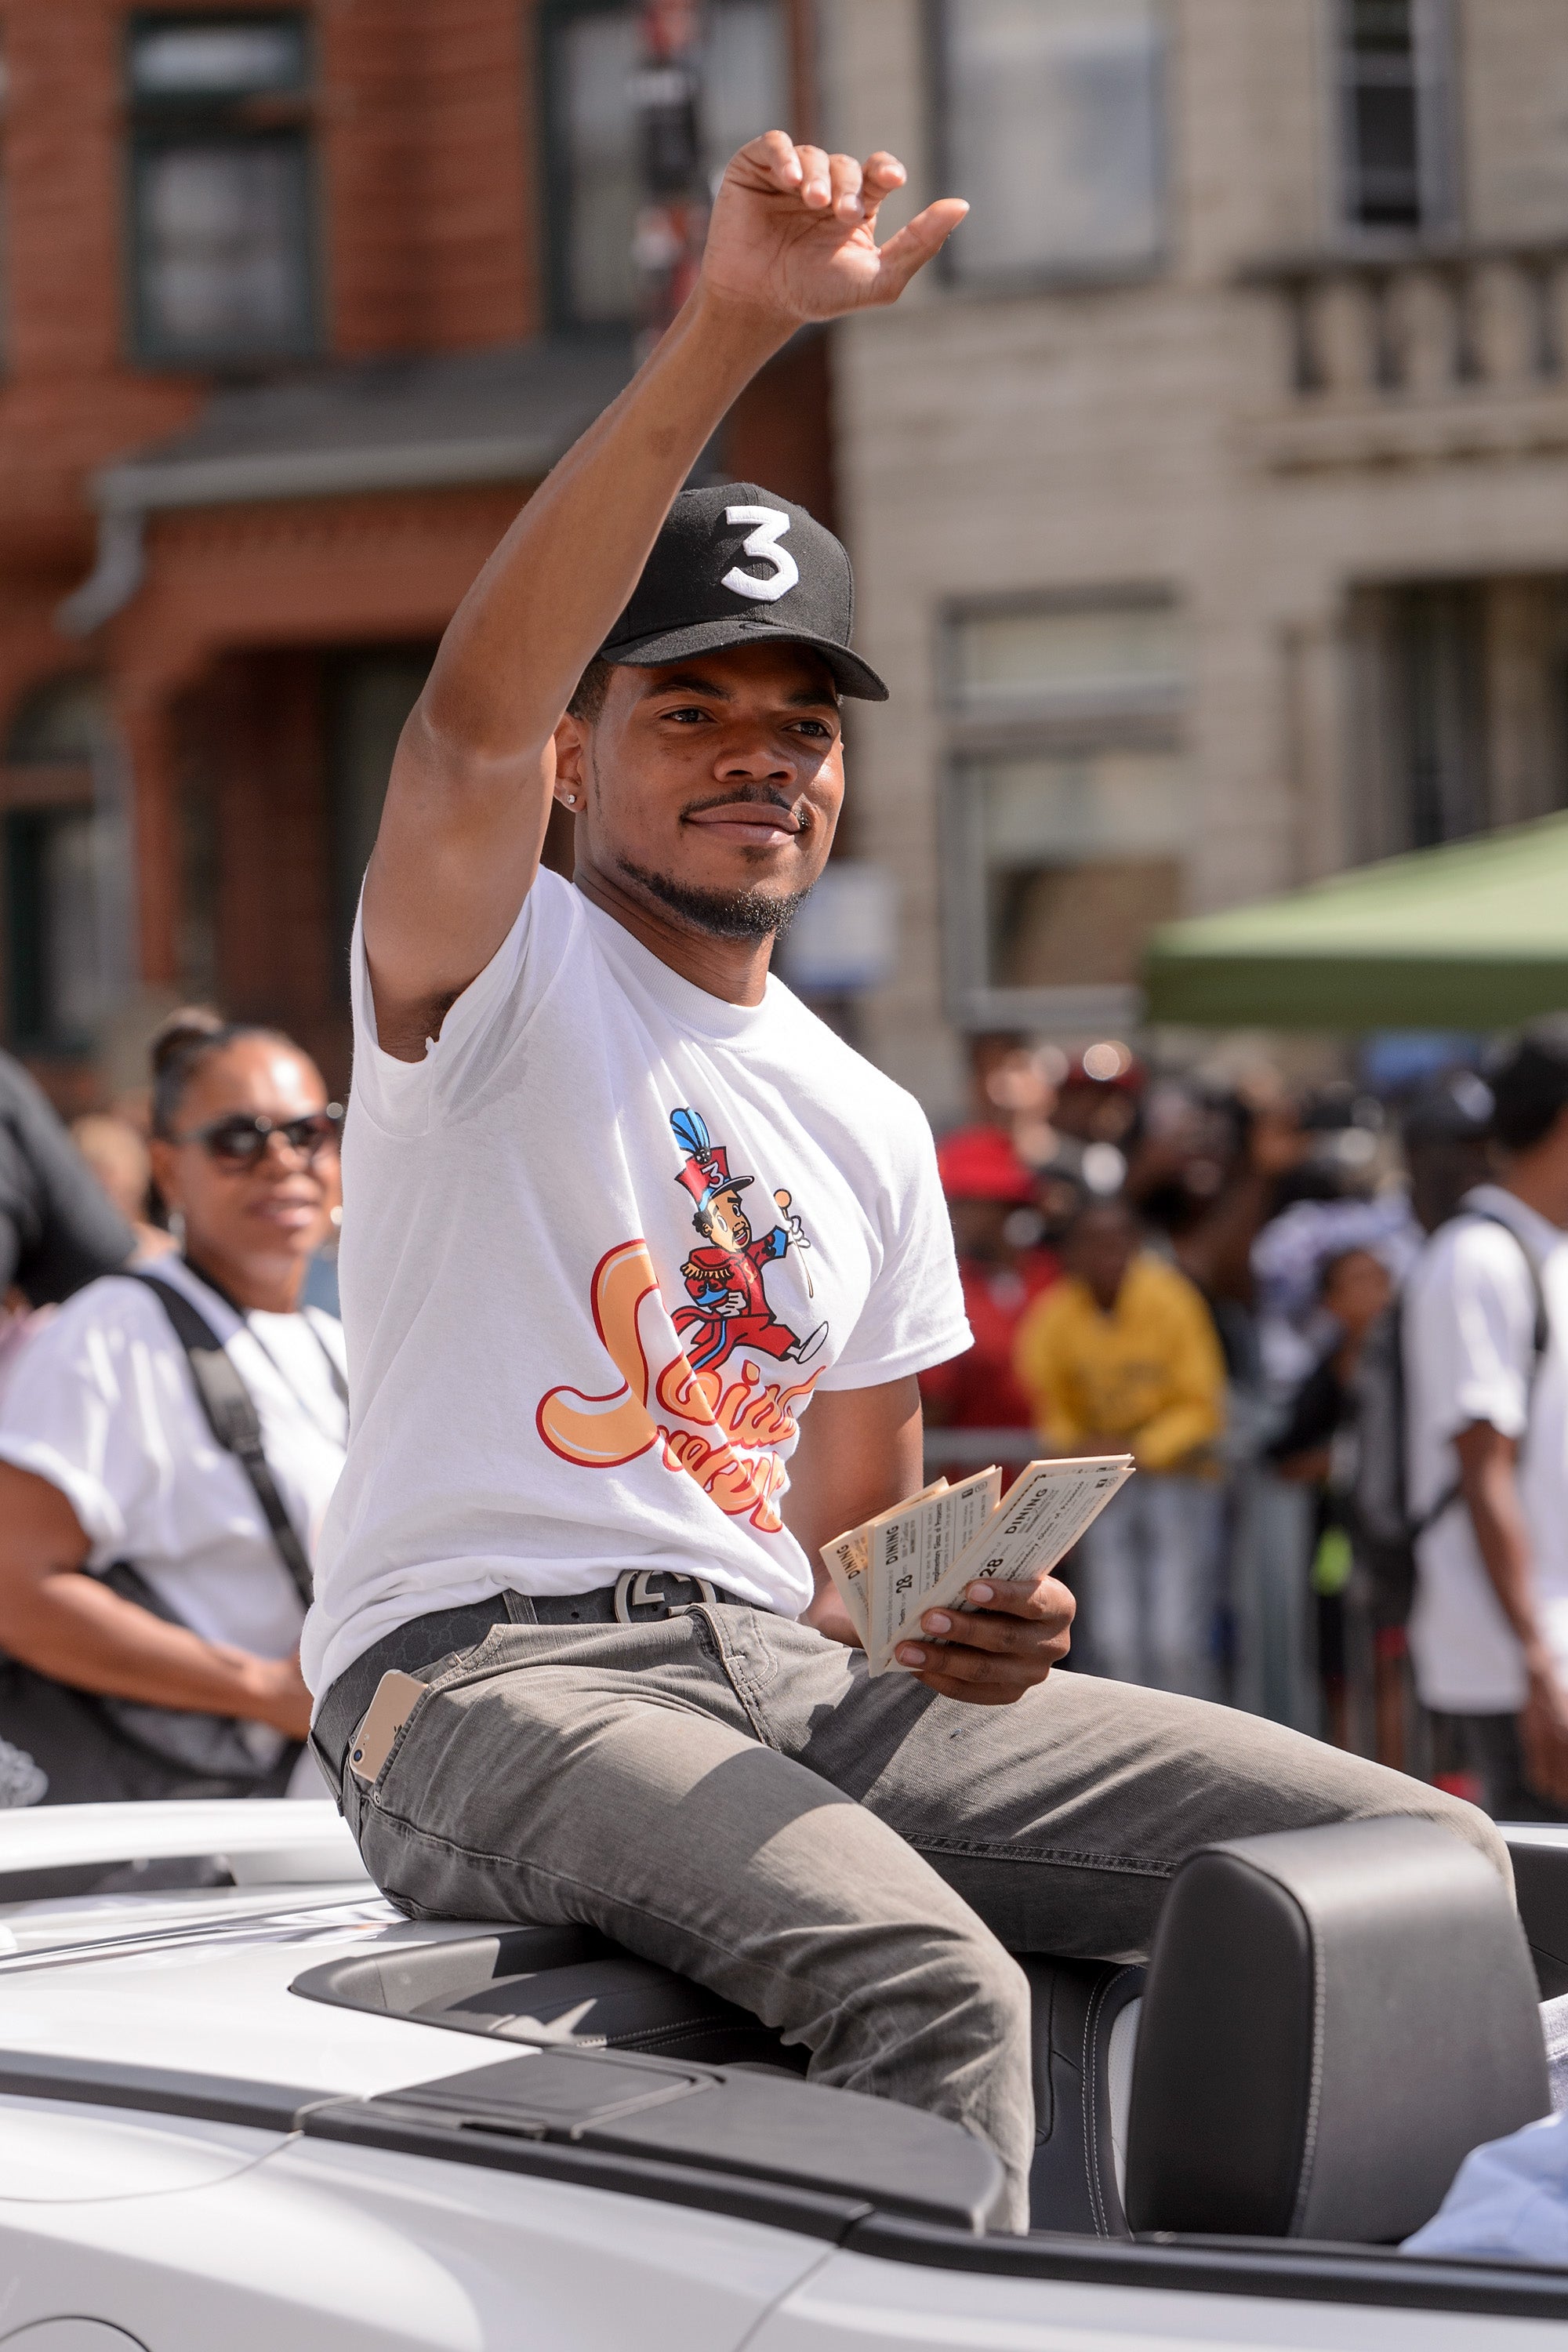 Chance The Rapper Gifts 300 Pairs Of Unreleased Jordans To Chicago Teens During #OpenMikeChicago
